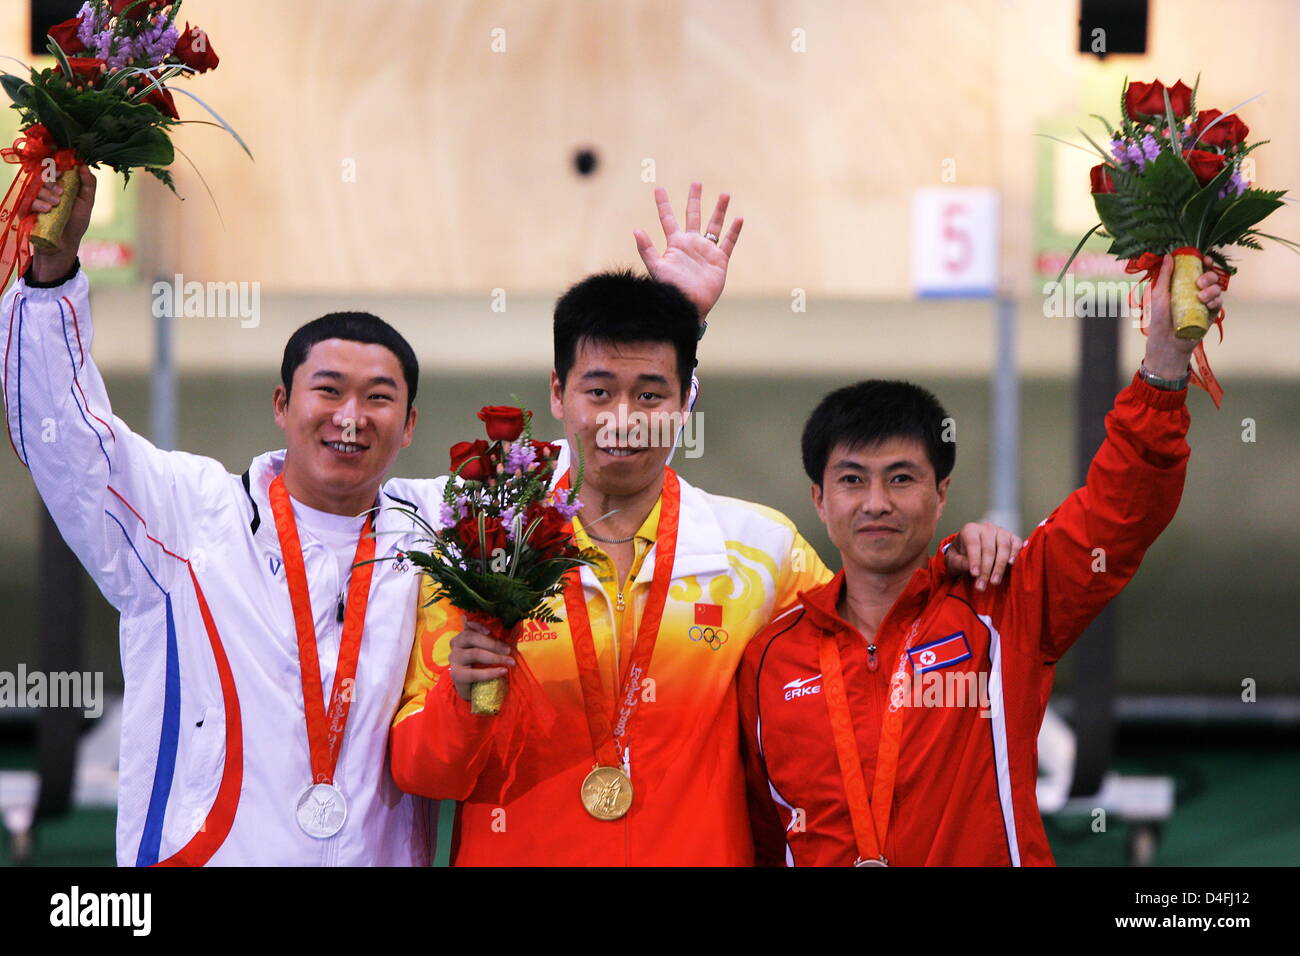 Gold medal winner Chinese Wei Pang (C) is flanked by silver medallist South Korean Jong Oh Jin (L) and bronze medallist North Korean Jong Su Kim (R) during the medal ceremony in the men`s 10m air pistol final in the Beijing Shooting Range Hall at the Beijing 2008 Olympic Games, China, 09 August 2008. Photo: Jens Buettner (c) dpa - Bildfunk Stock Photo